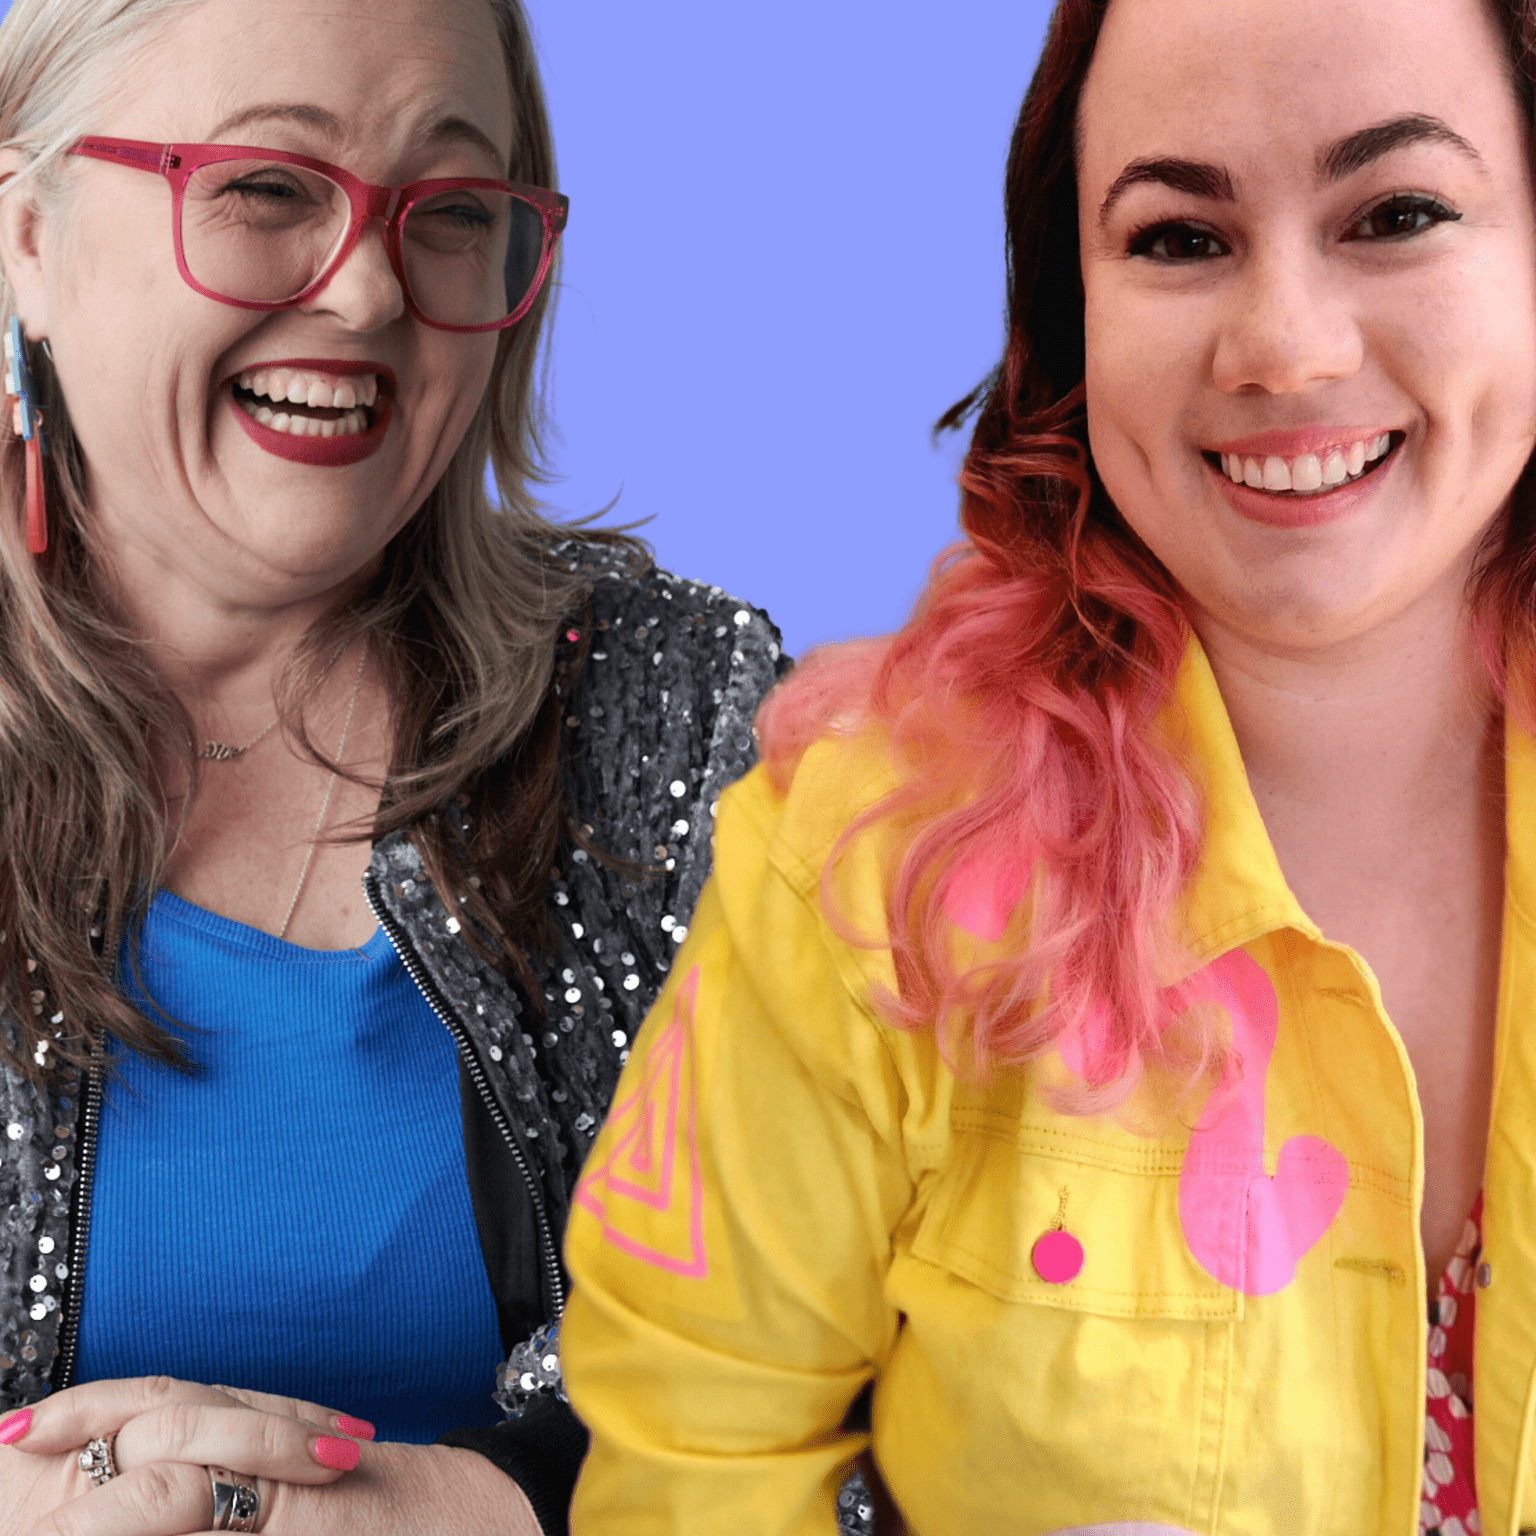 blonde autistic woman in blue top laughing and looking at autistic woman with brown and pink hair in yellow top talking about social hubs for autistic youth